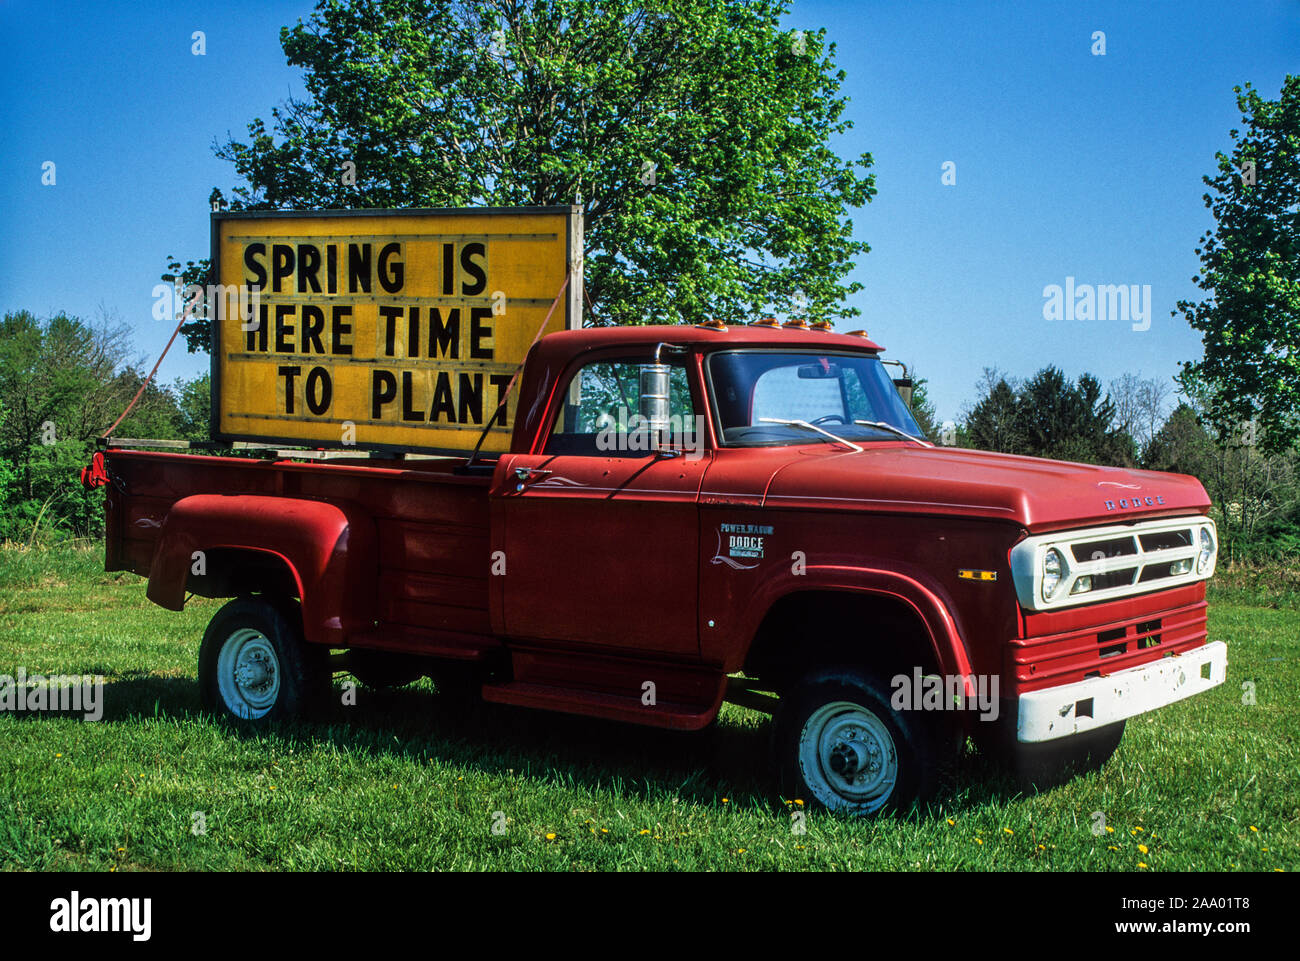 Vintage Pickup truck with a sign advertisement, Spring is here time to plant sign, Flemington, New Jersey, USA, vintage signage signs, May 2005 Stock Photo